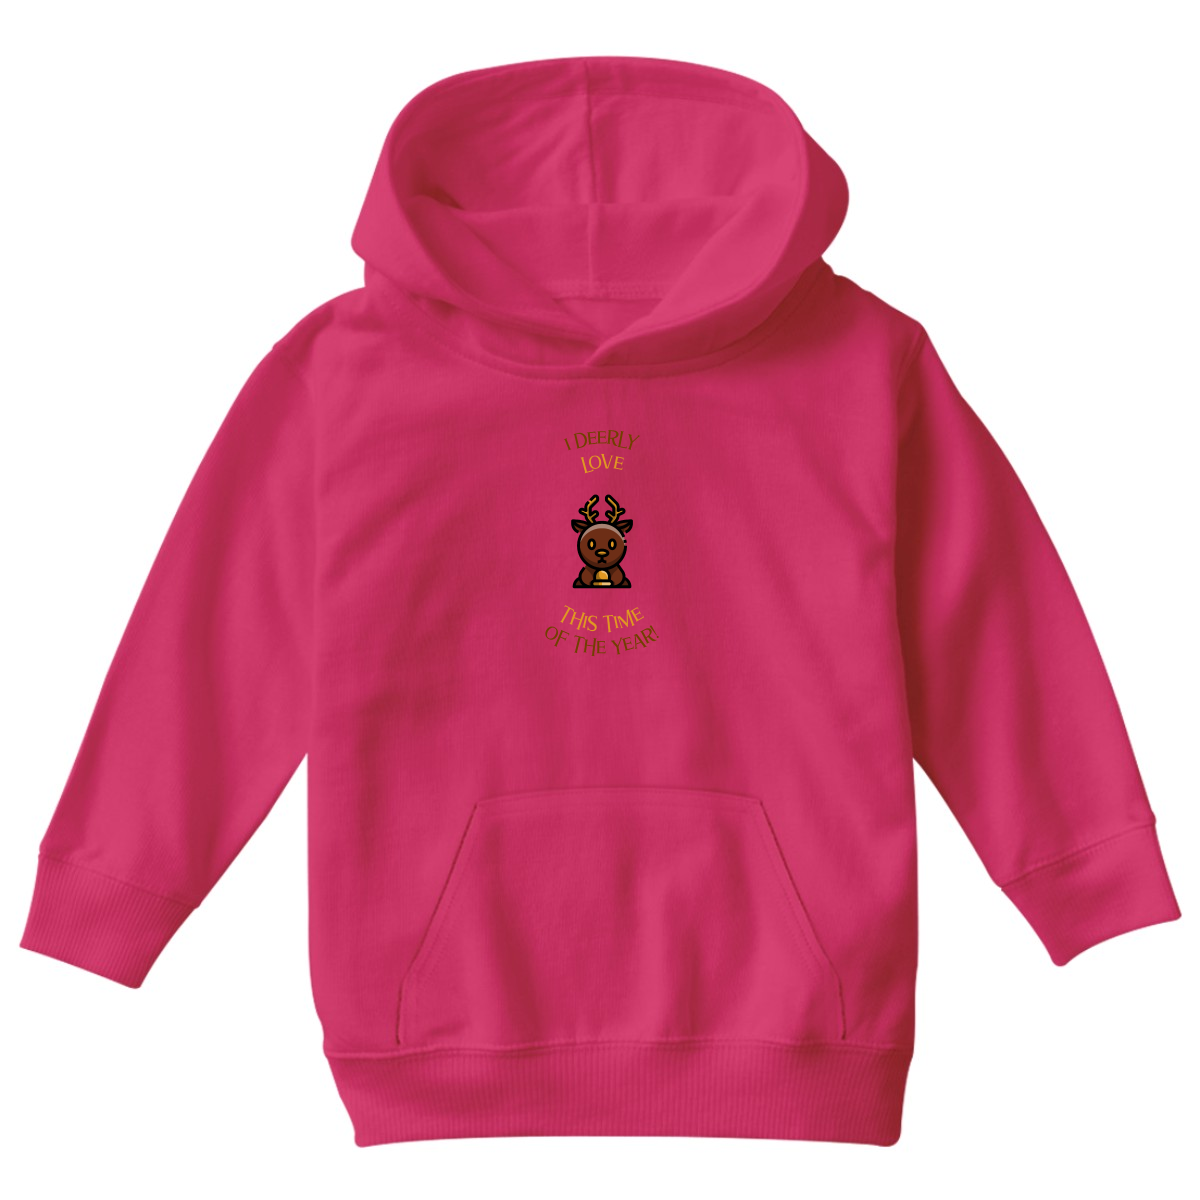 I Deerly Love This Time of the Year! Kids Hoodie | Pink